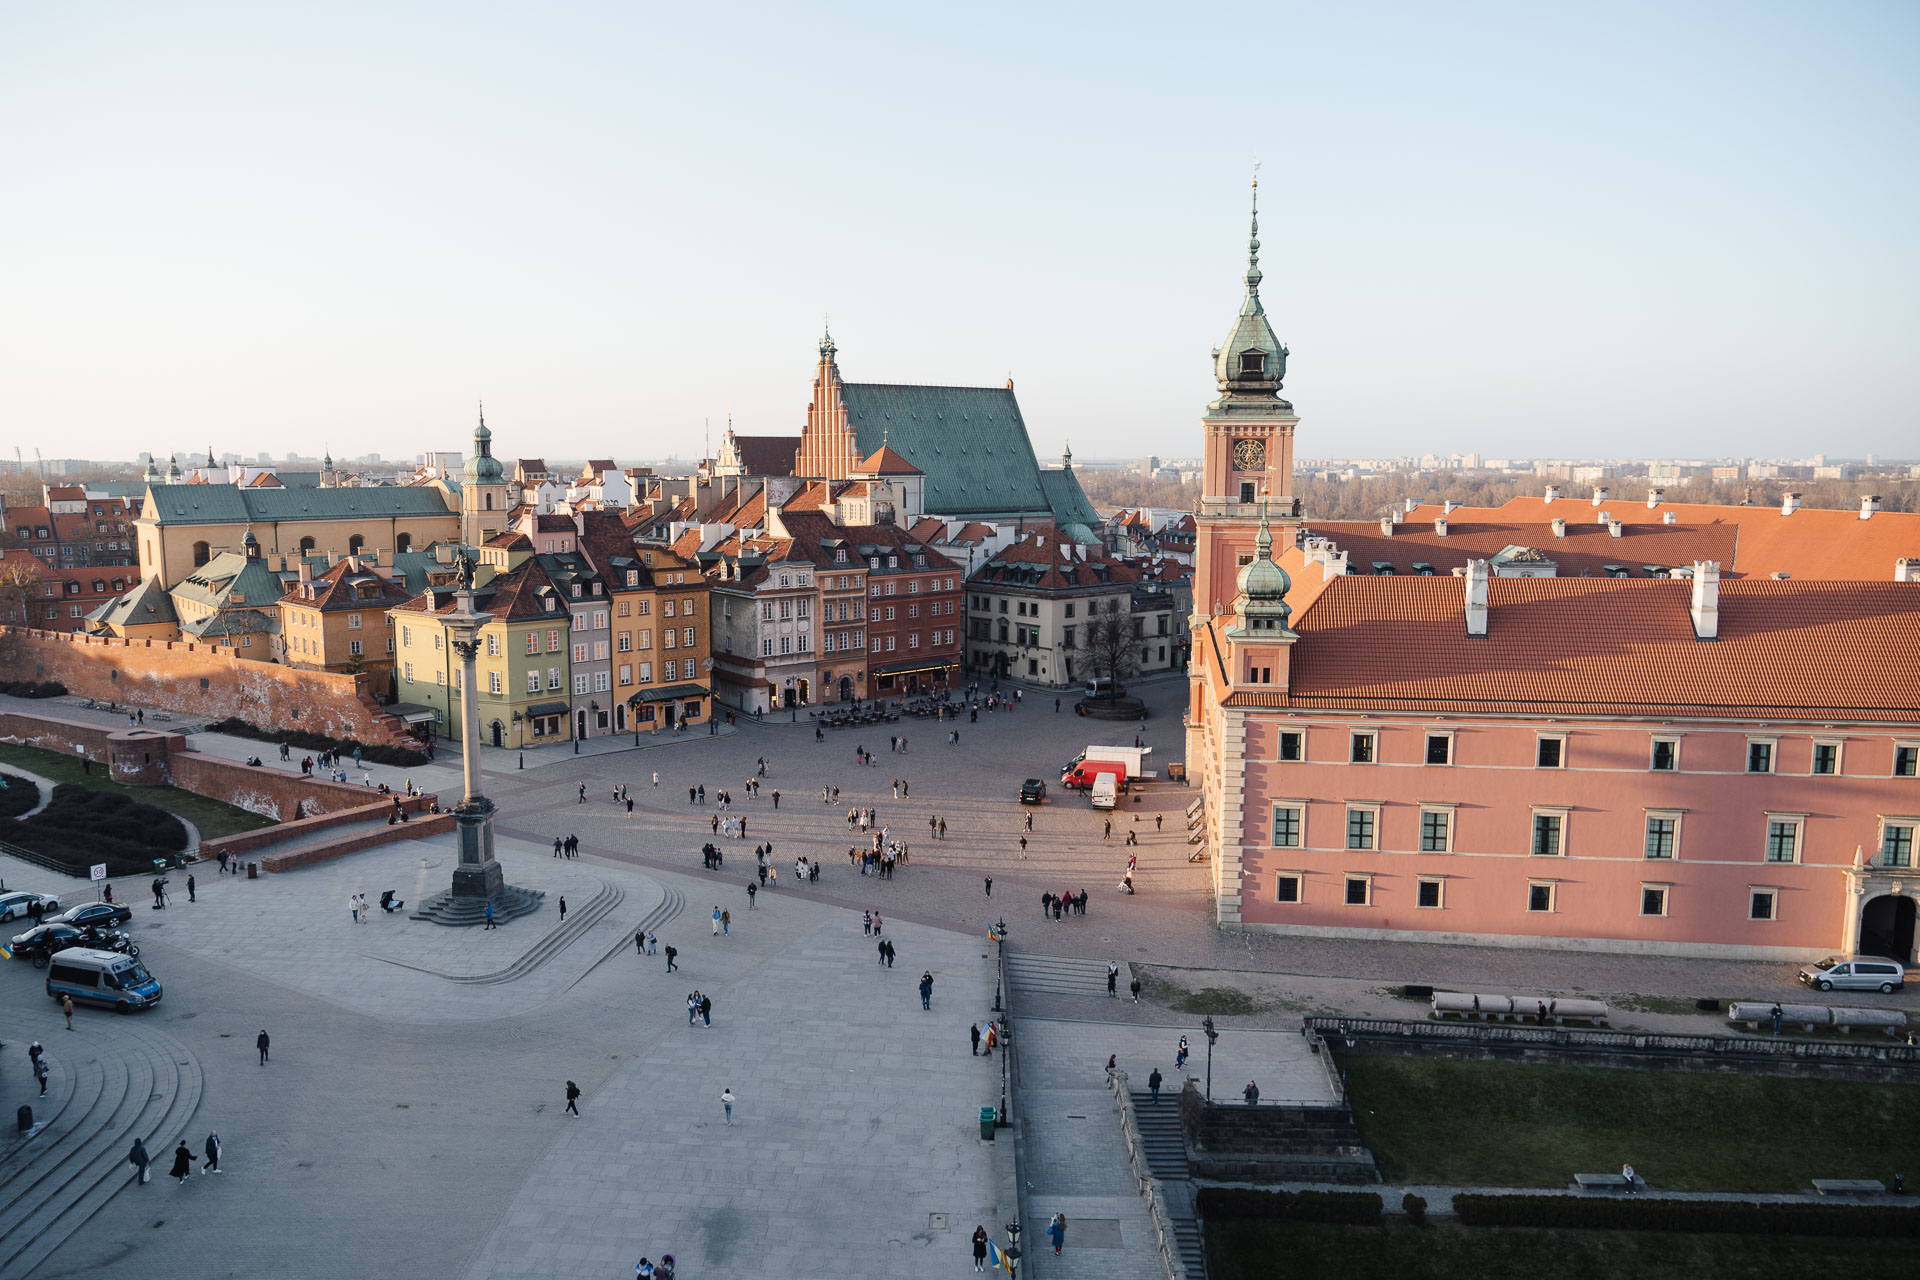 View from St Anne's Church Bell Tower in Warsaw, Poland. We see Castle Square from above with the Old Town in the background. Prominent structures are Sigismund's Column on the left and the Royal Castle on the right. The scenery is washed in golden hour light.